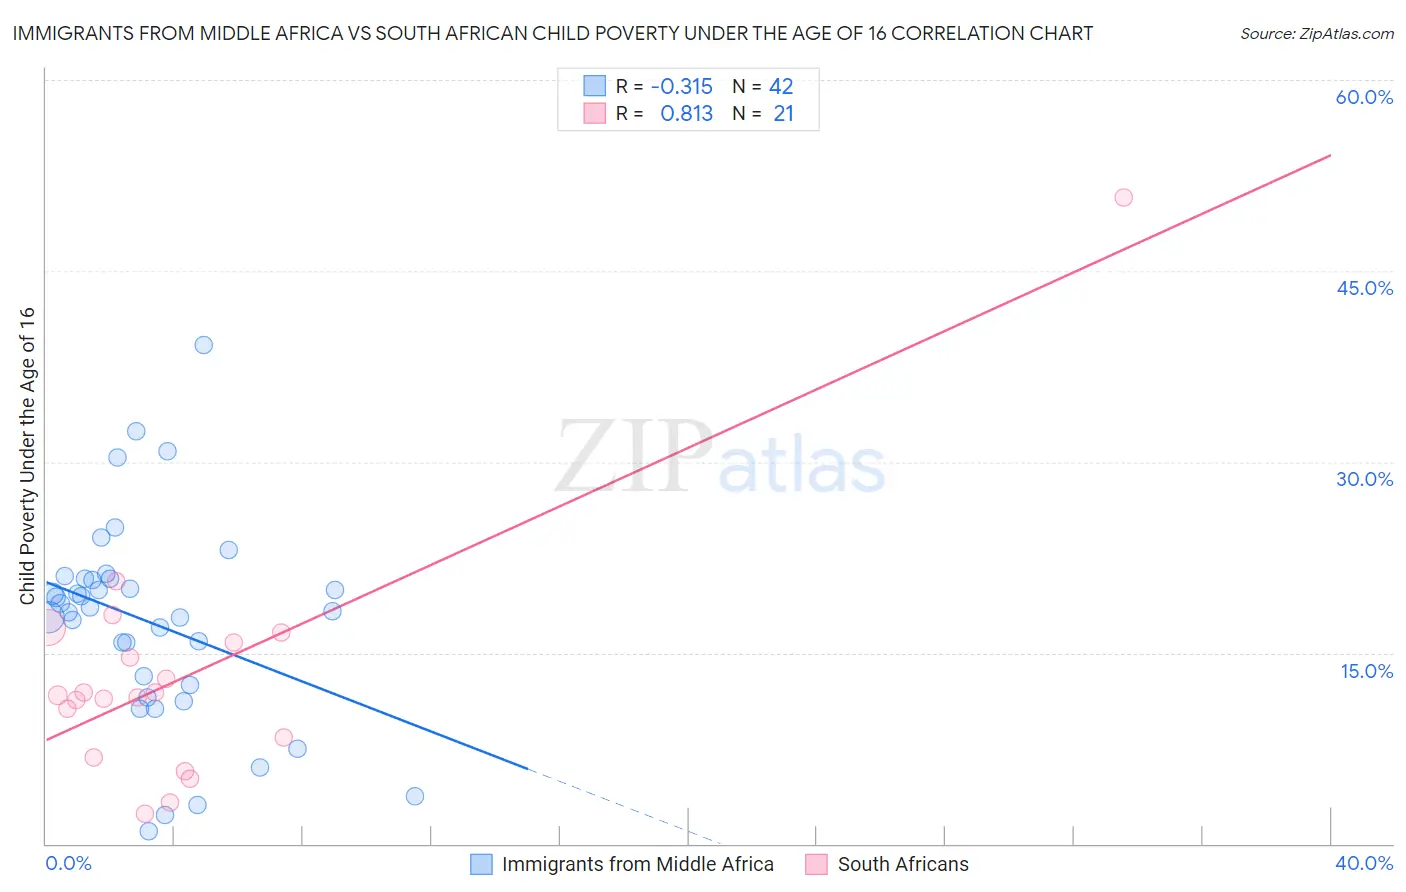 Immigrants from Middle Africa vs South African Child Poverty Under the Age of 16